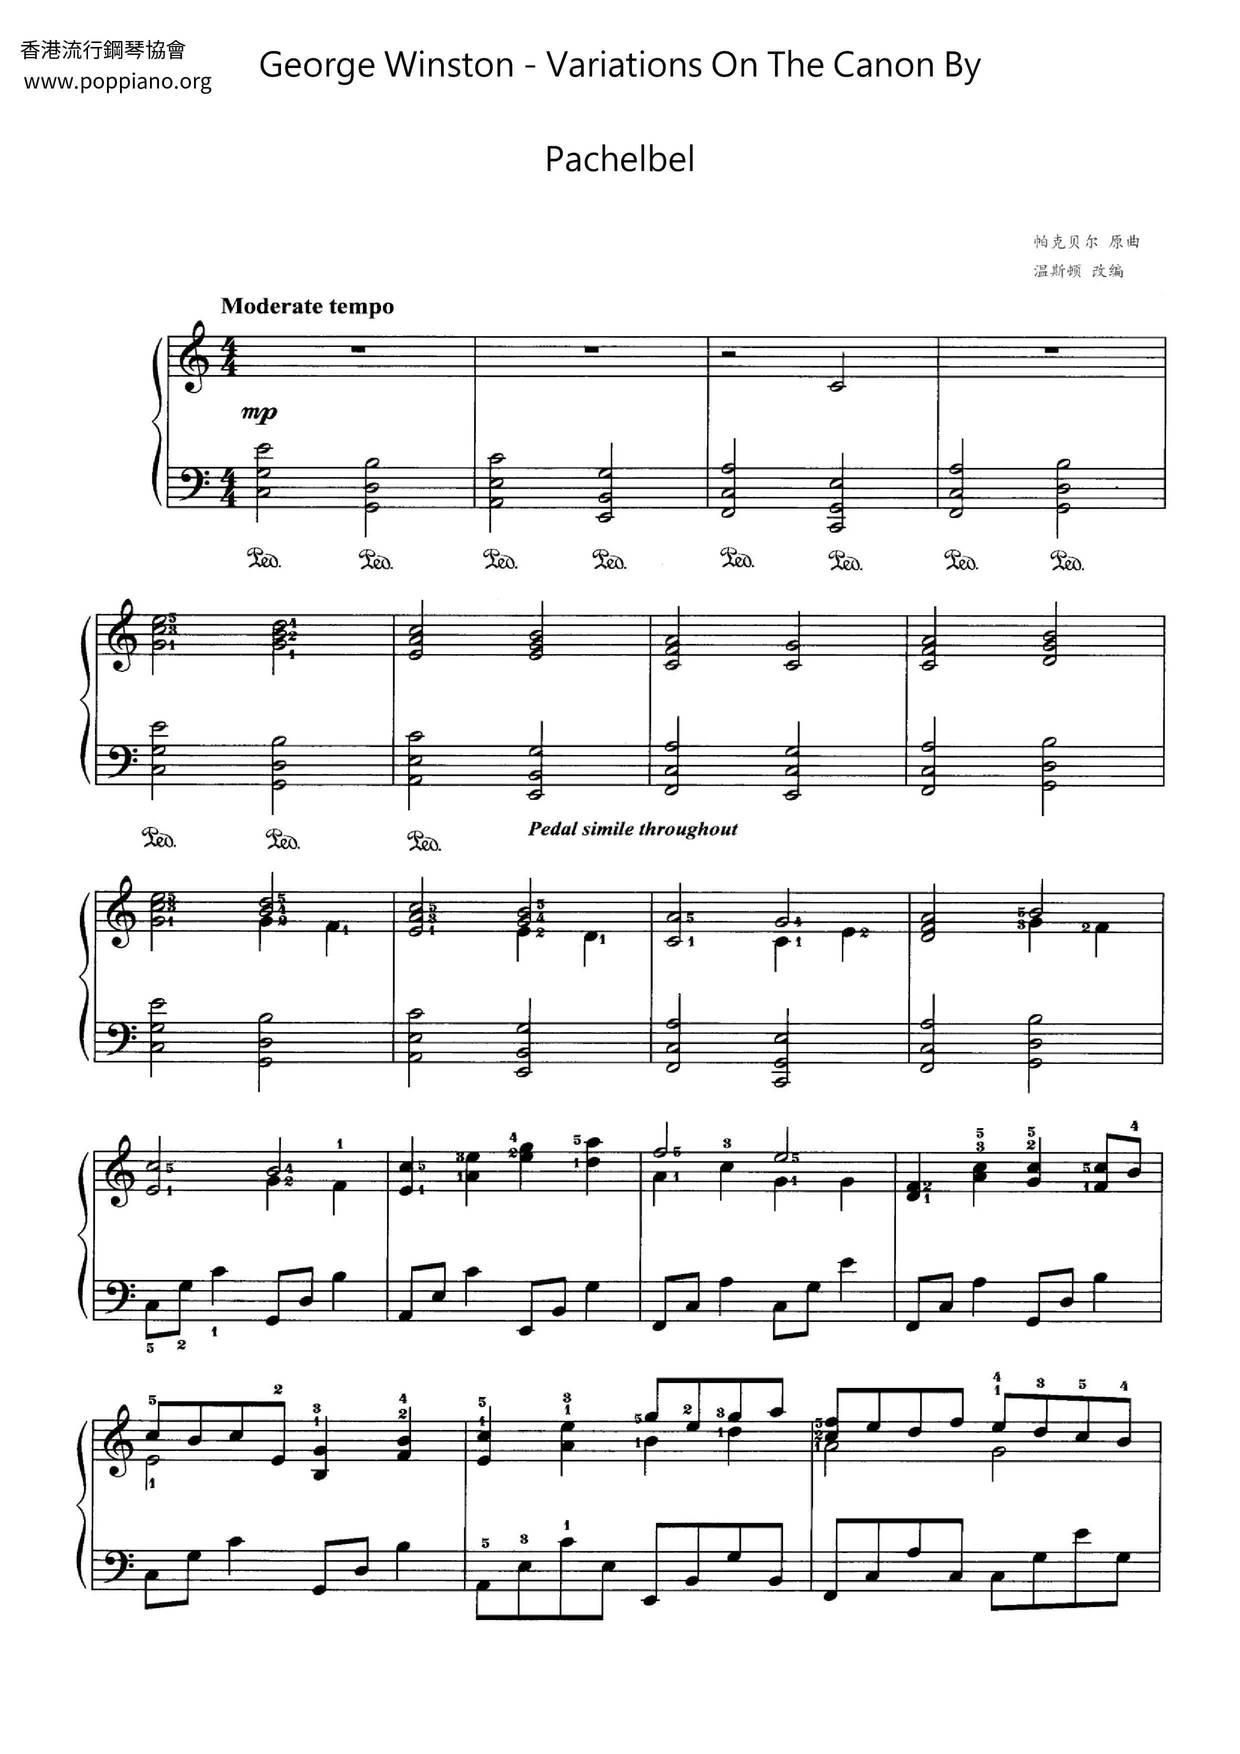 Variations on the Canon by Pachelbel Score